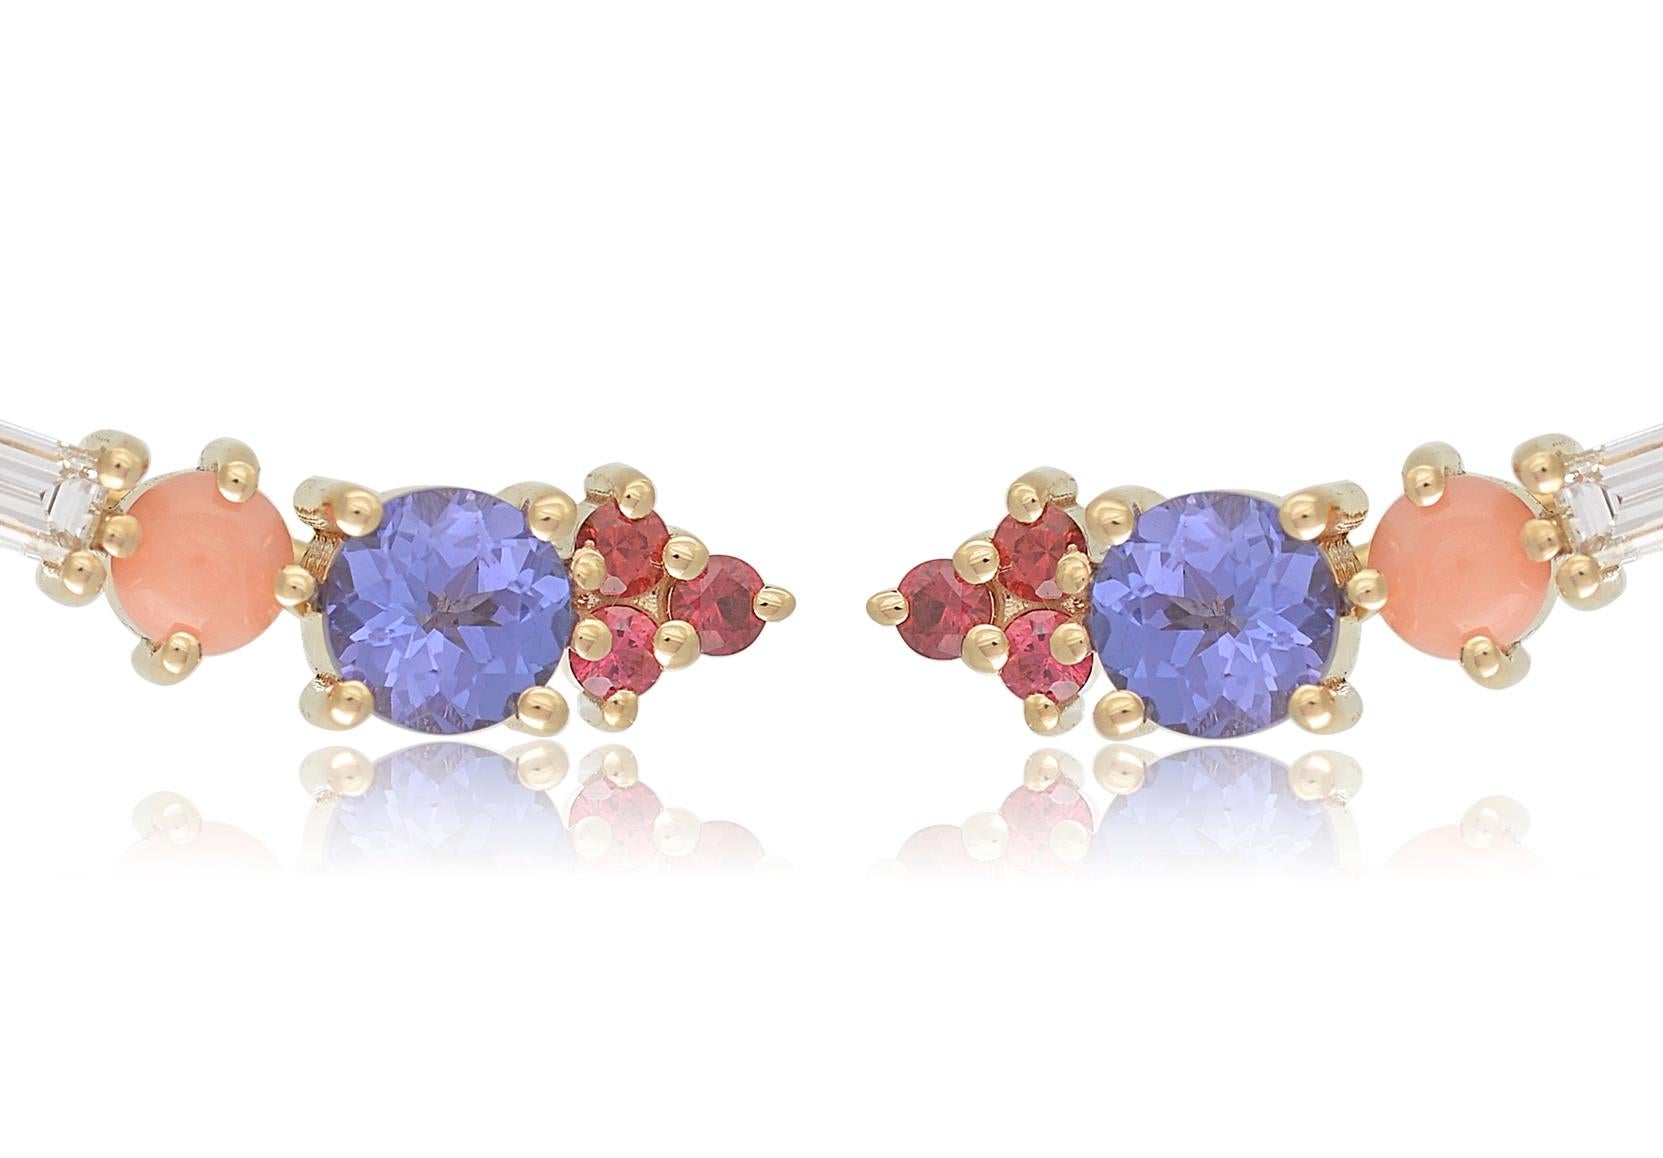 Contemporary 18 Karat Gold Ear Climbers with Tanzanites, Spinels, Corals and Diamond